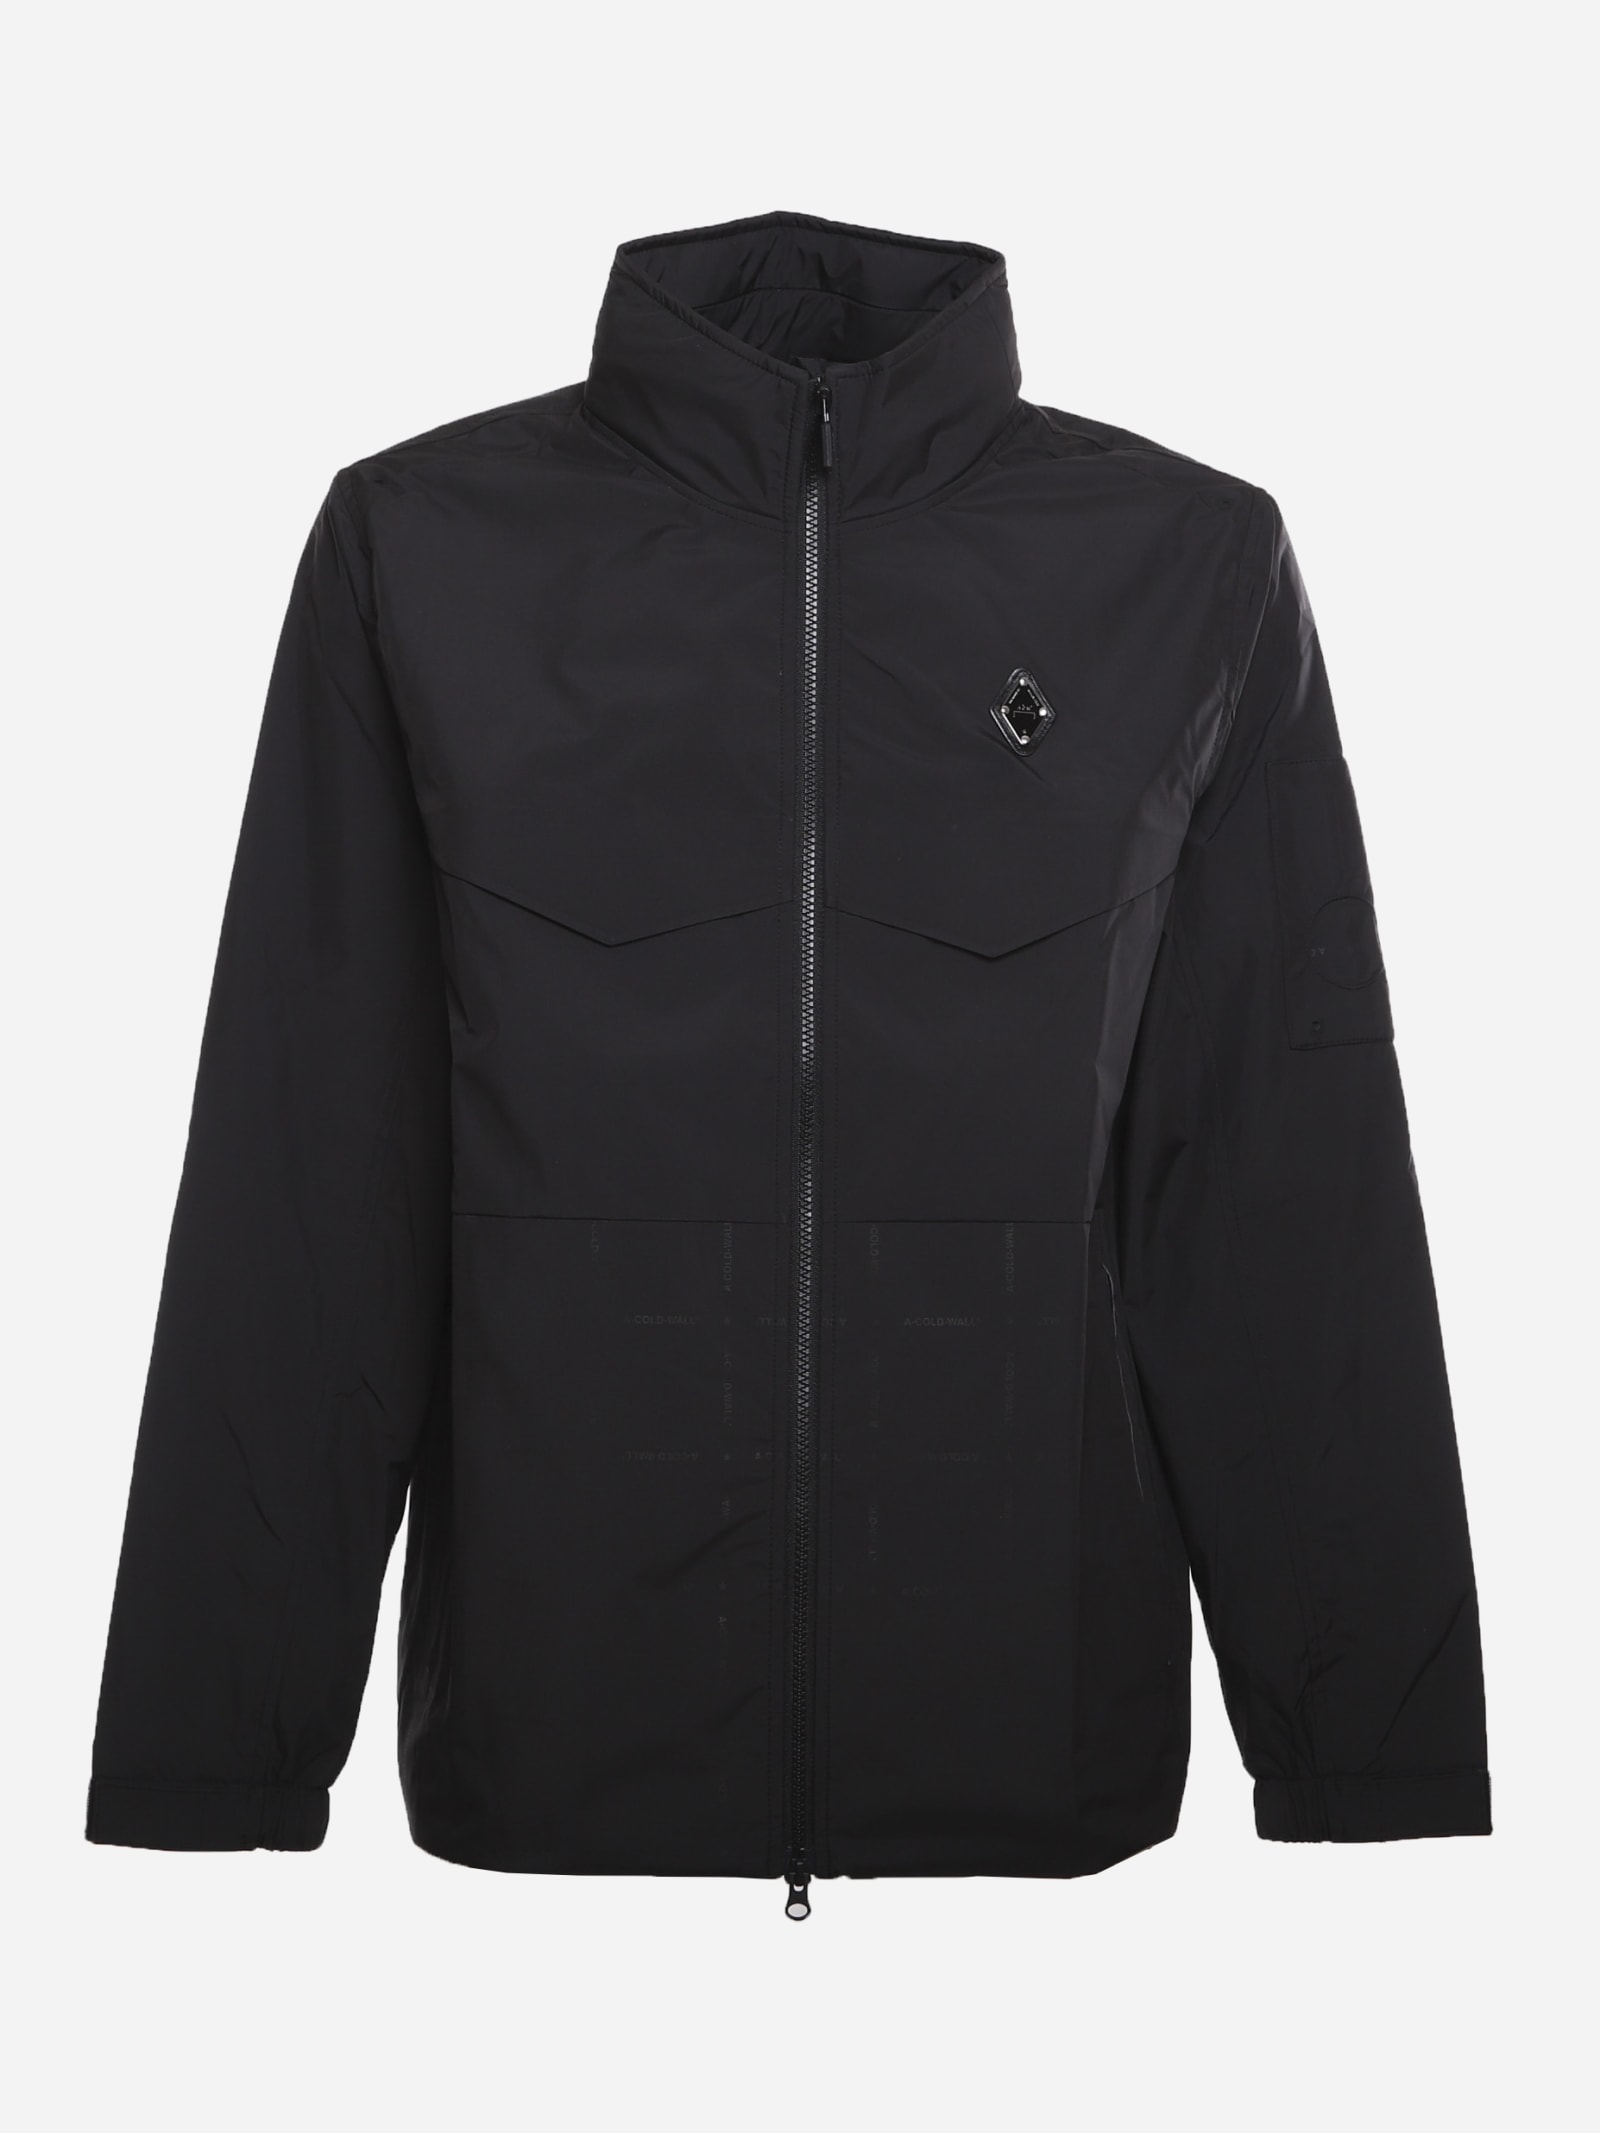 A-COLD-WALL Rhombus Storm Jacket In Technical Fabric